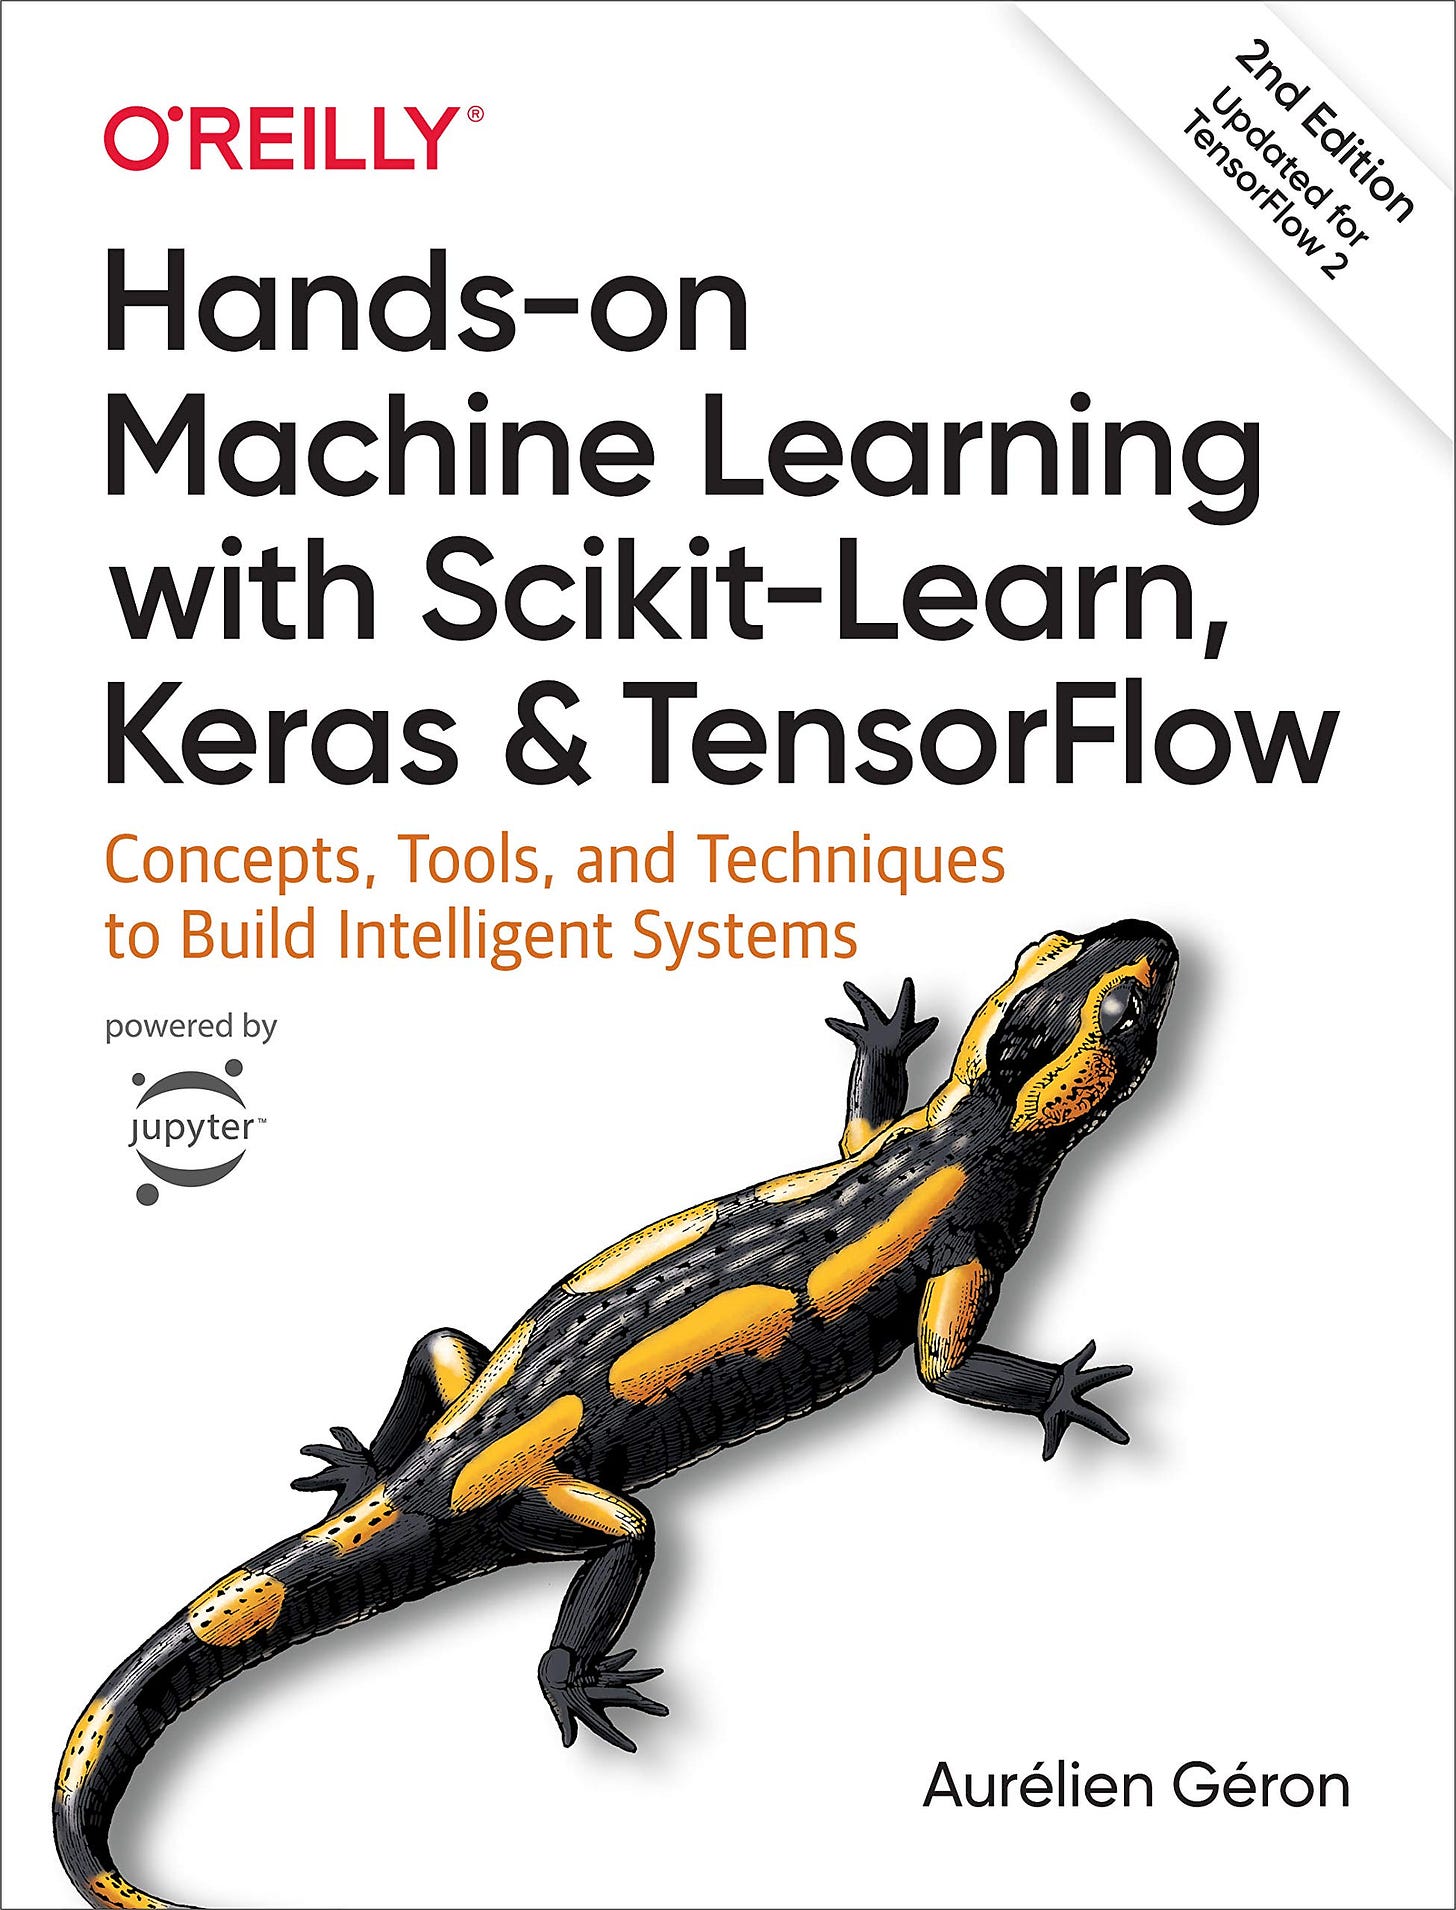 Hands-On Machine Learning with Scikit-Learn, Keras, and TensorFlow:  Concepts, Tools, and Techniques to Build Intelligent Systems: Géron,  Aurélien: 9781492032649: Books - Amazon.ca